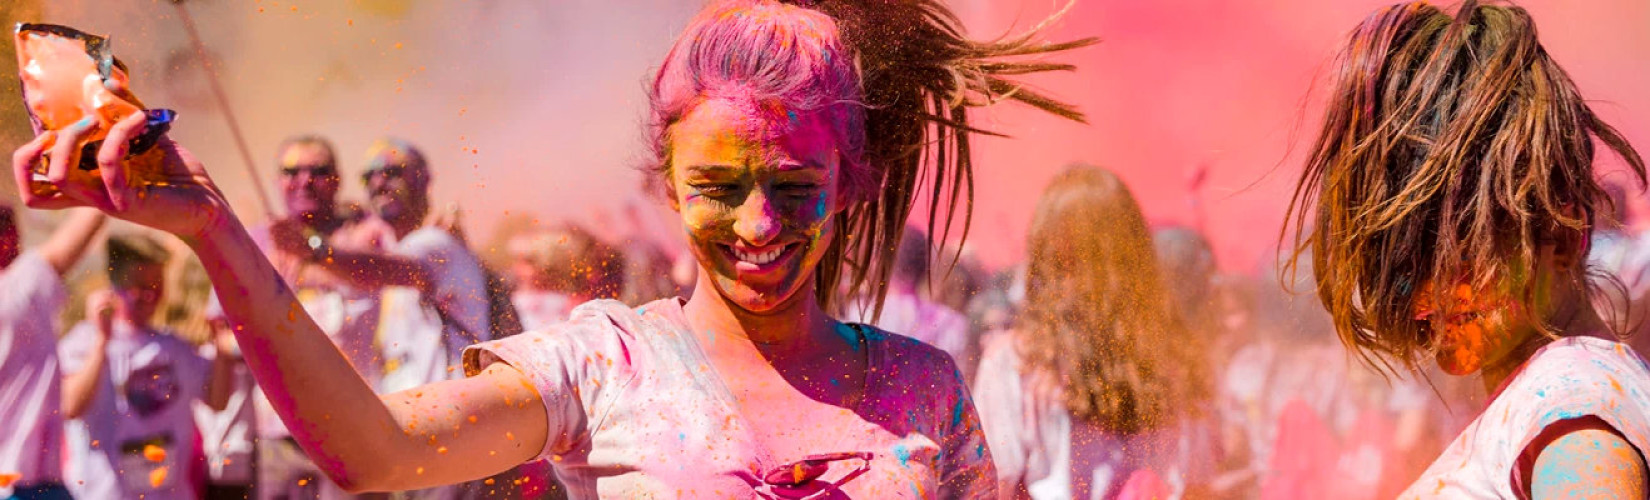 Festival of Colors in Nepal - Holi: A Vibrant Celebration of Spring and Unity